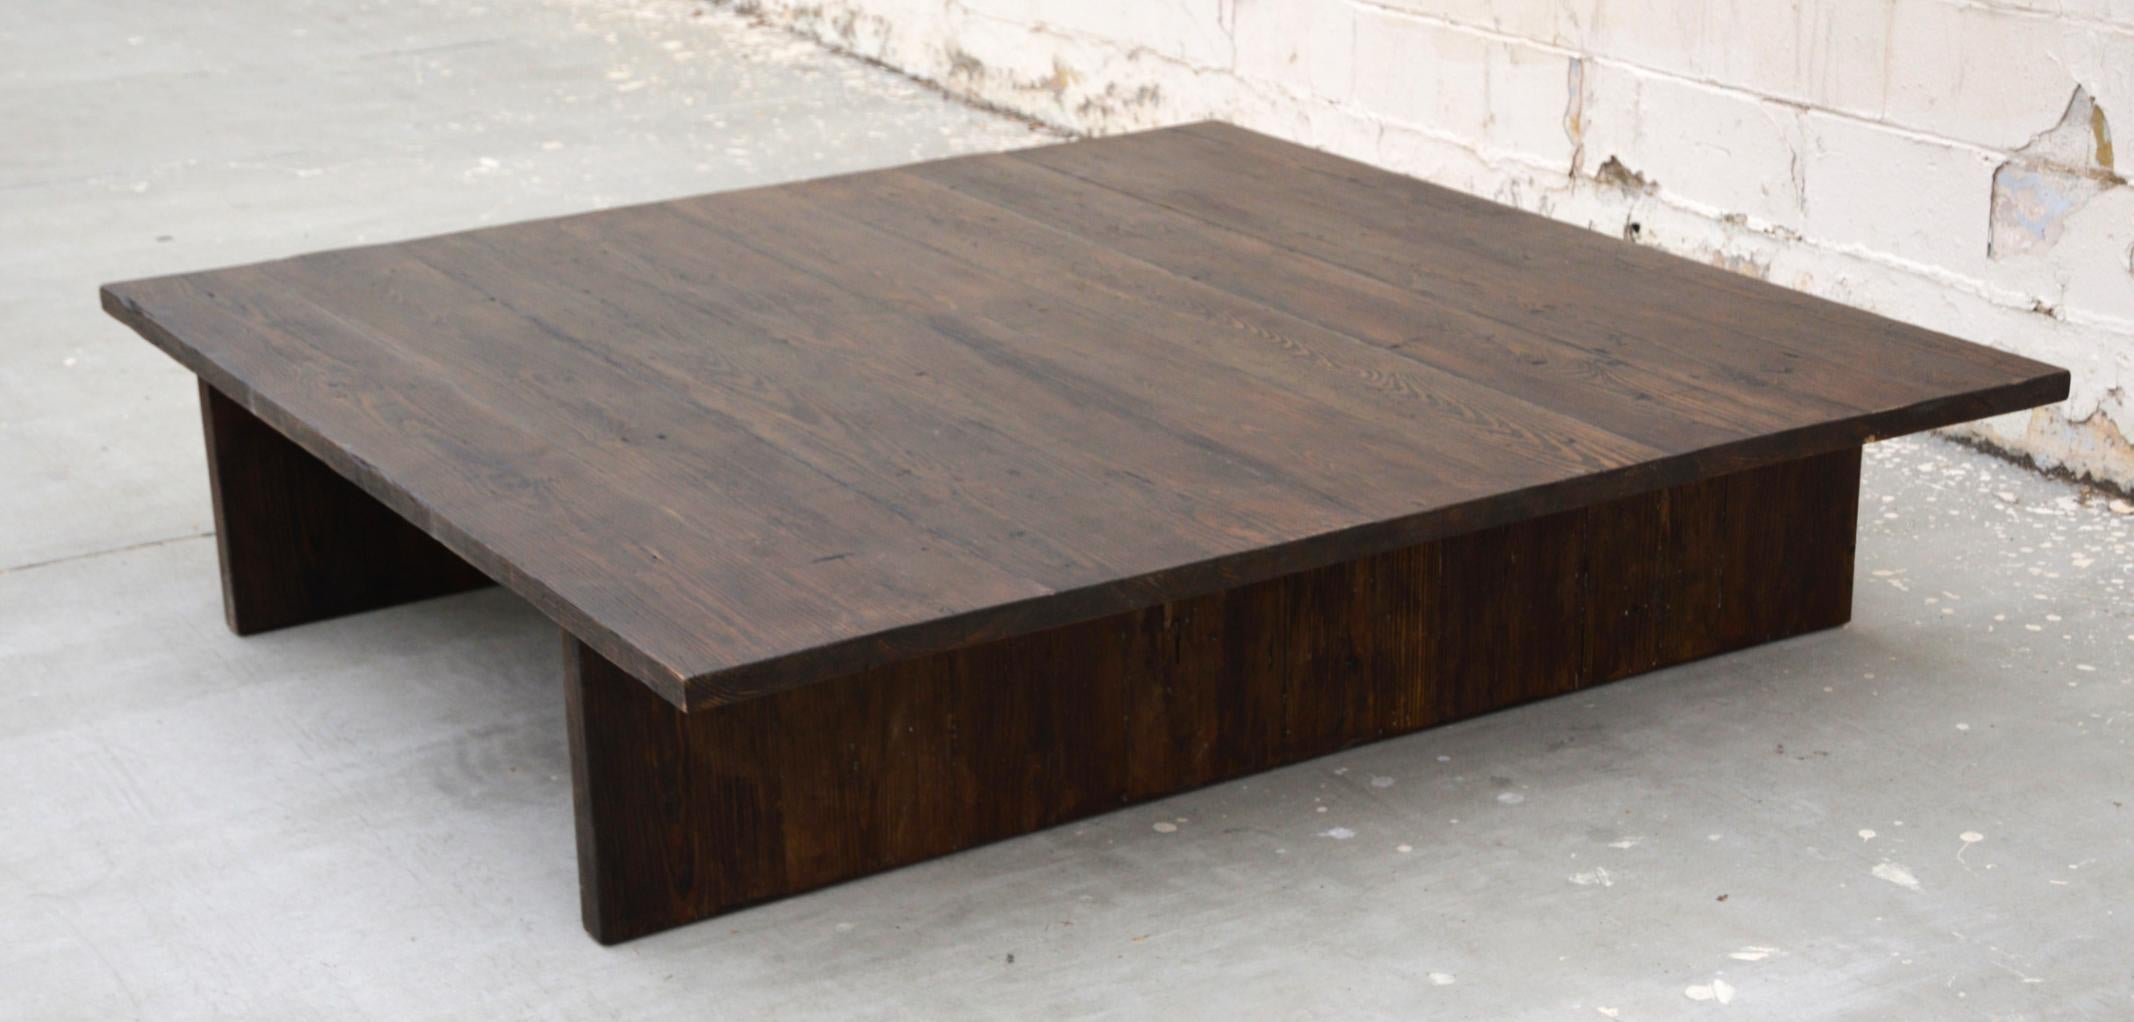 British Coffee Table Made from Distressed Oak